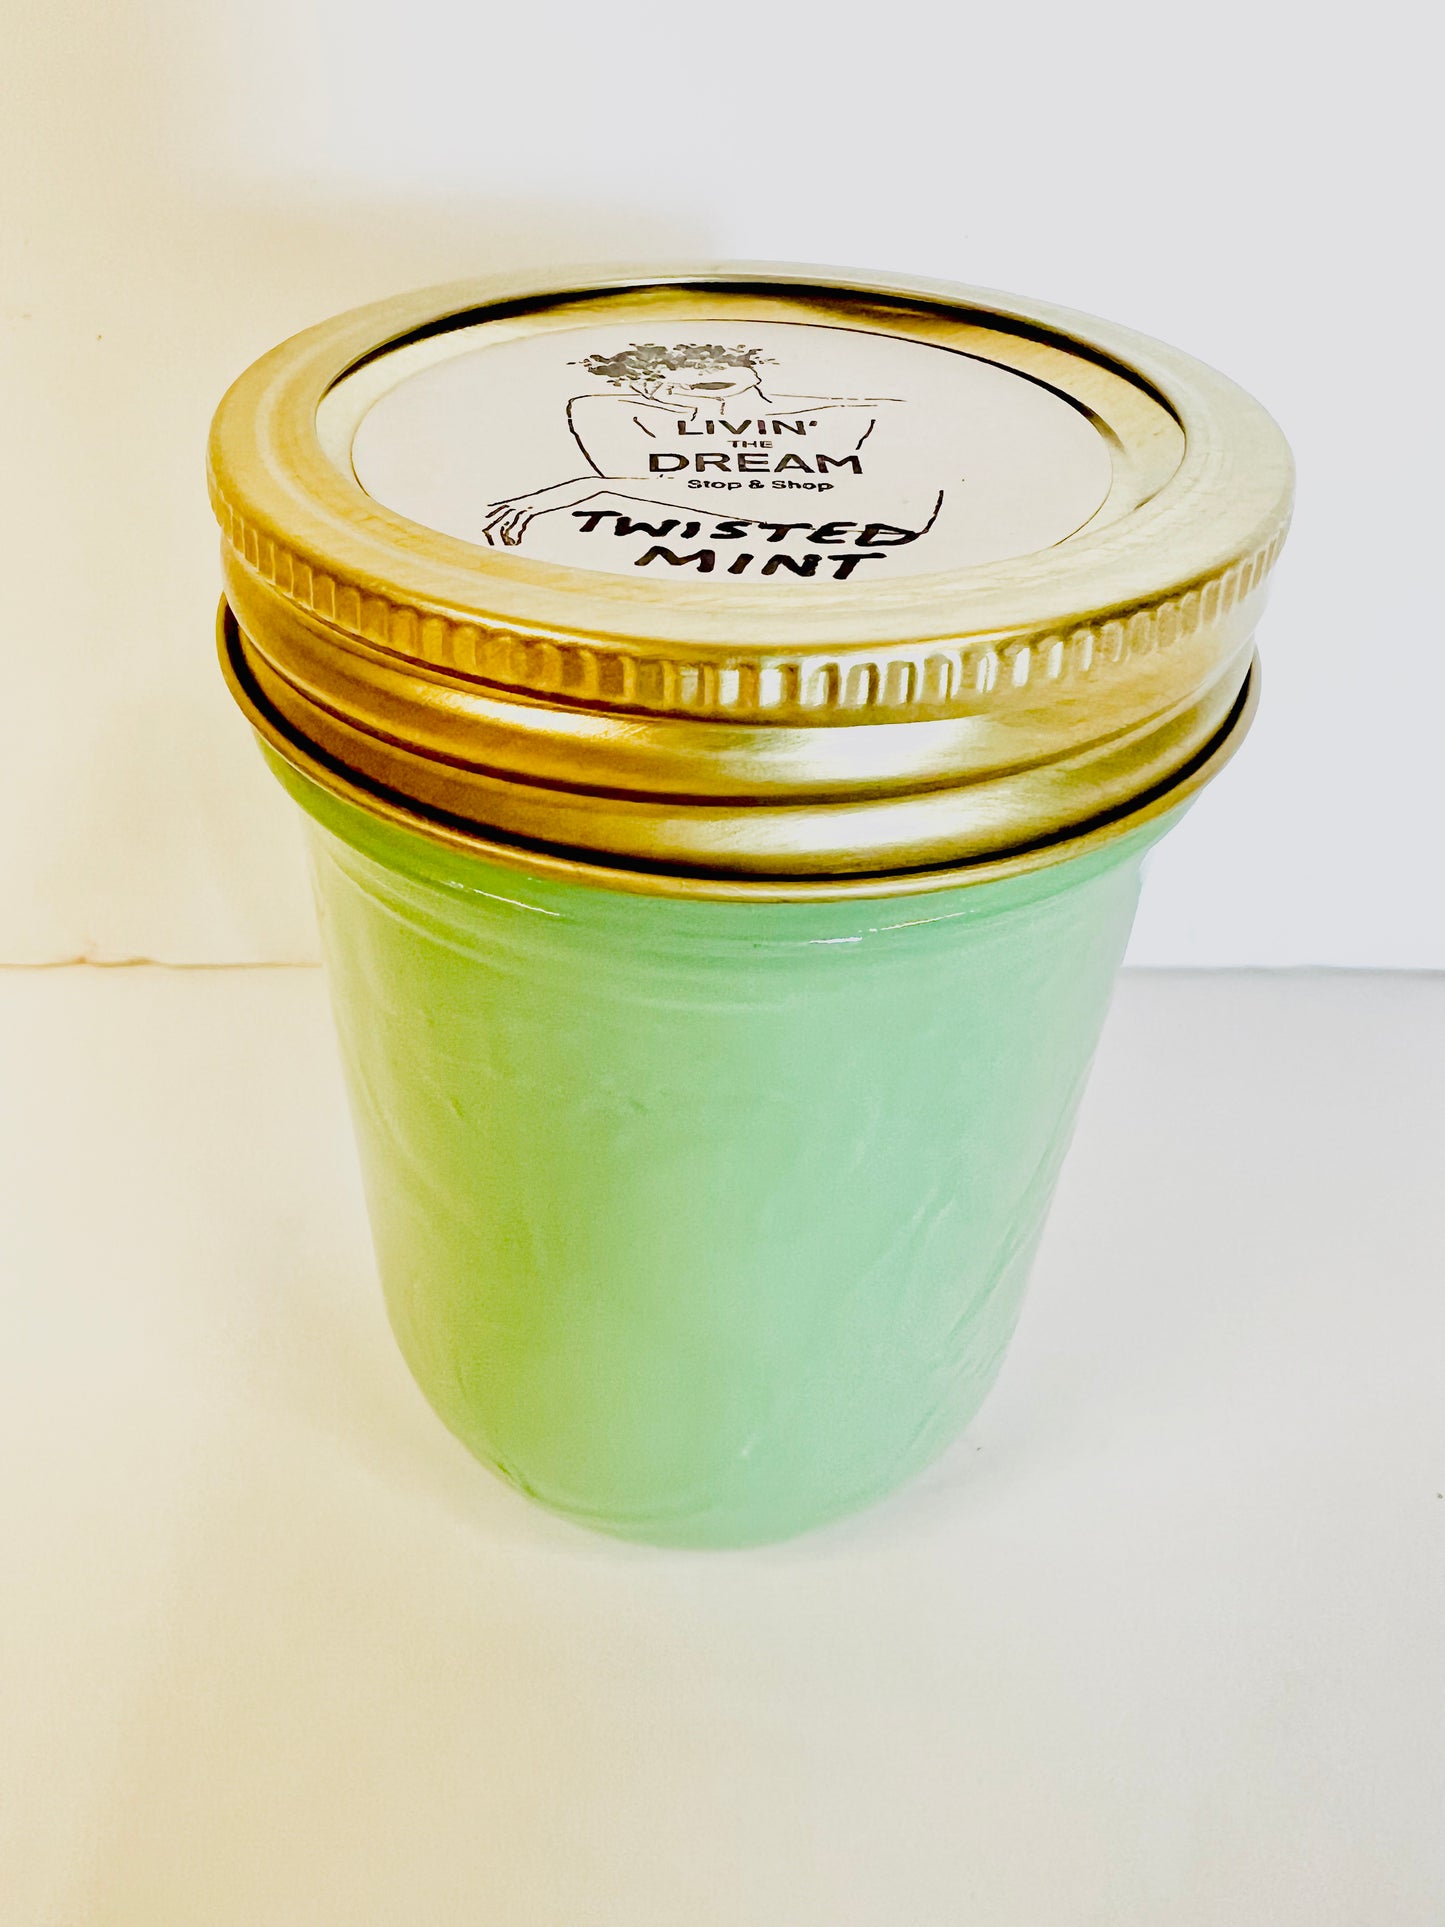 Twisted mint candle